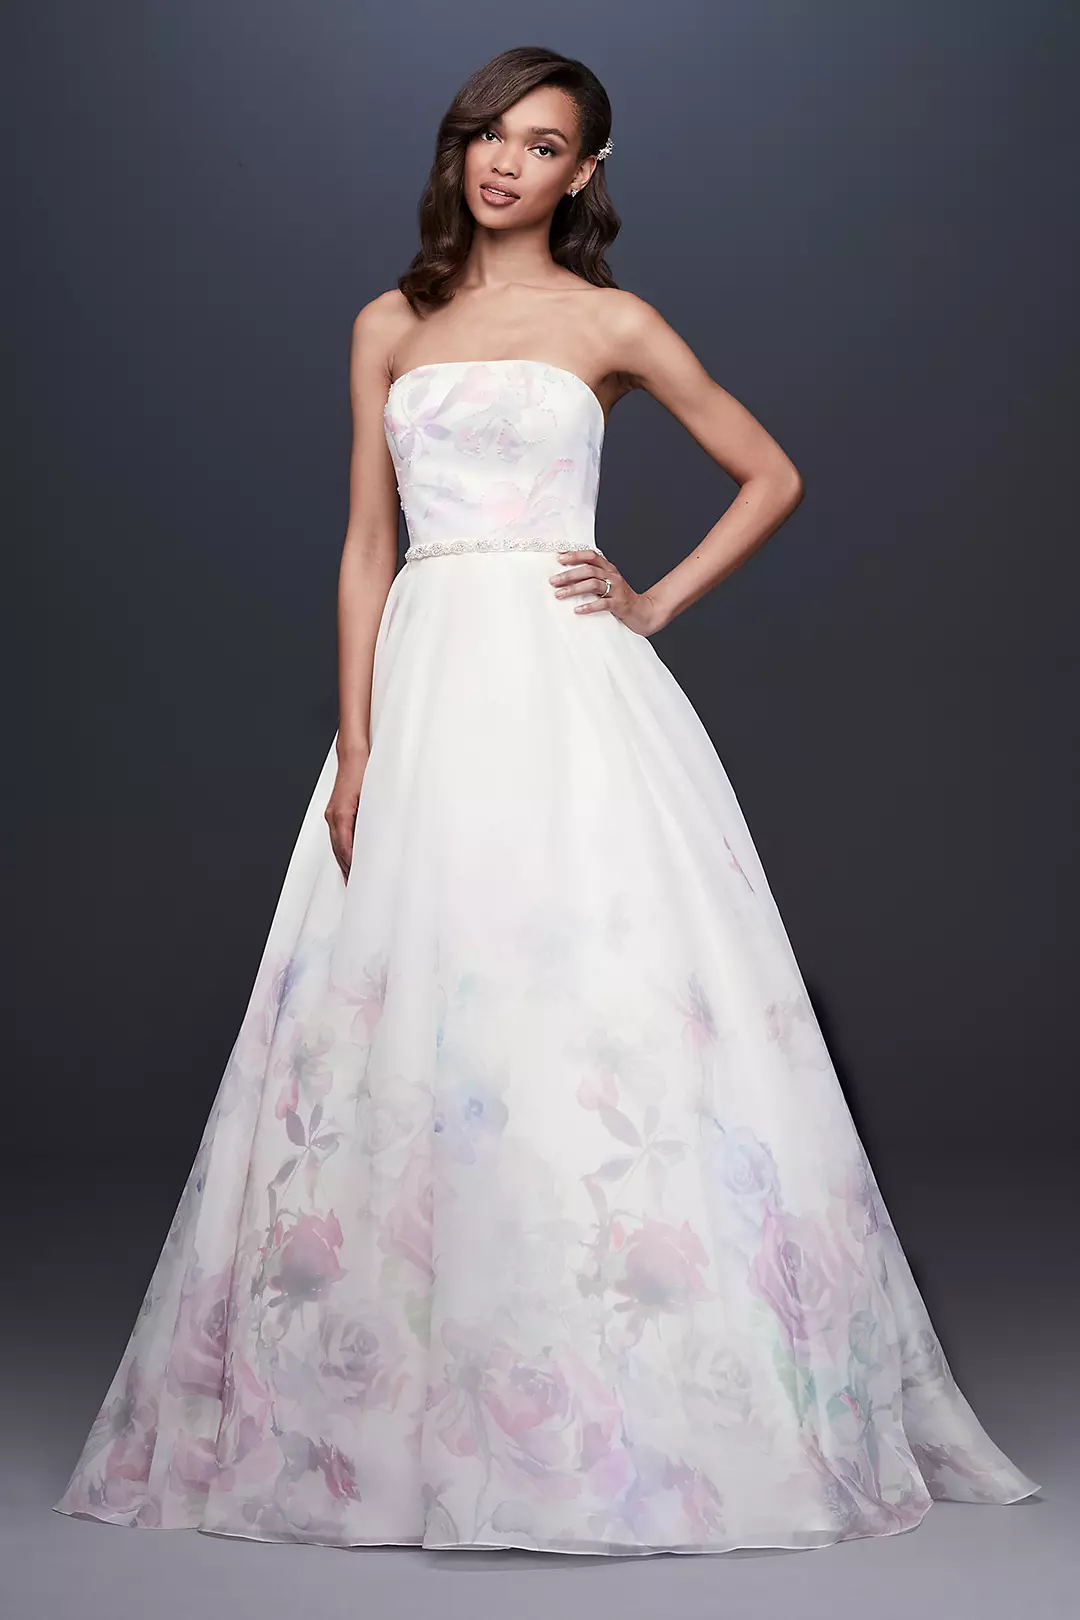 Floral Watercolor Organza Ball Gown Wedding Dress Image